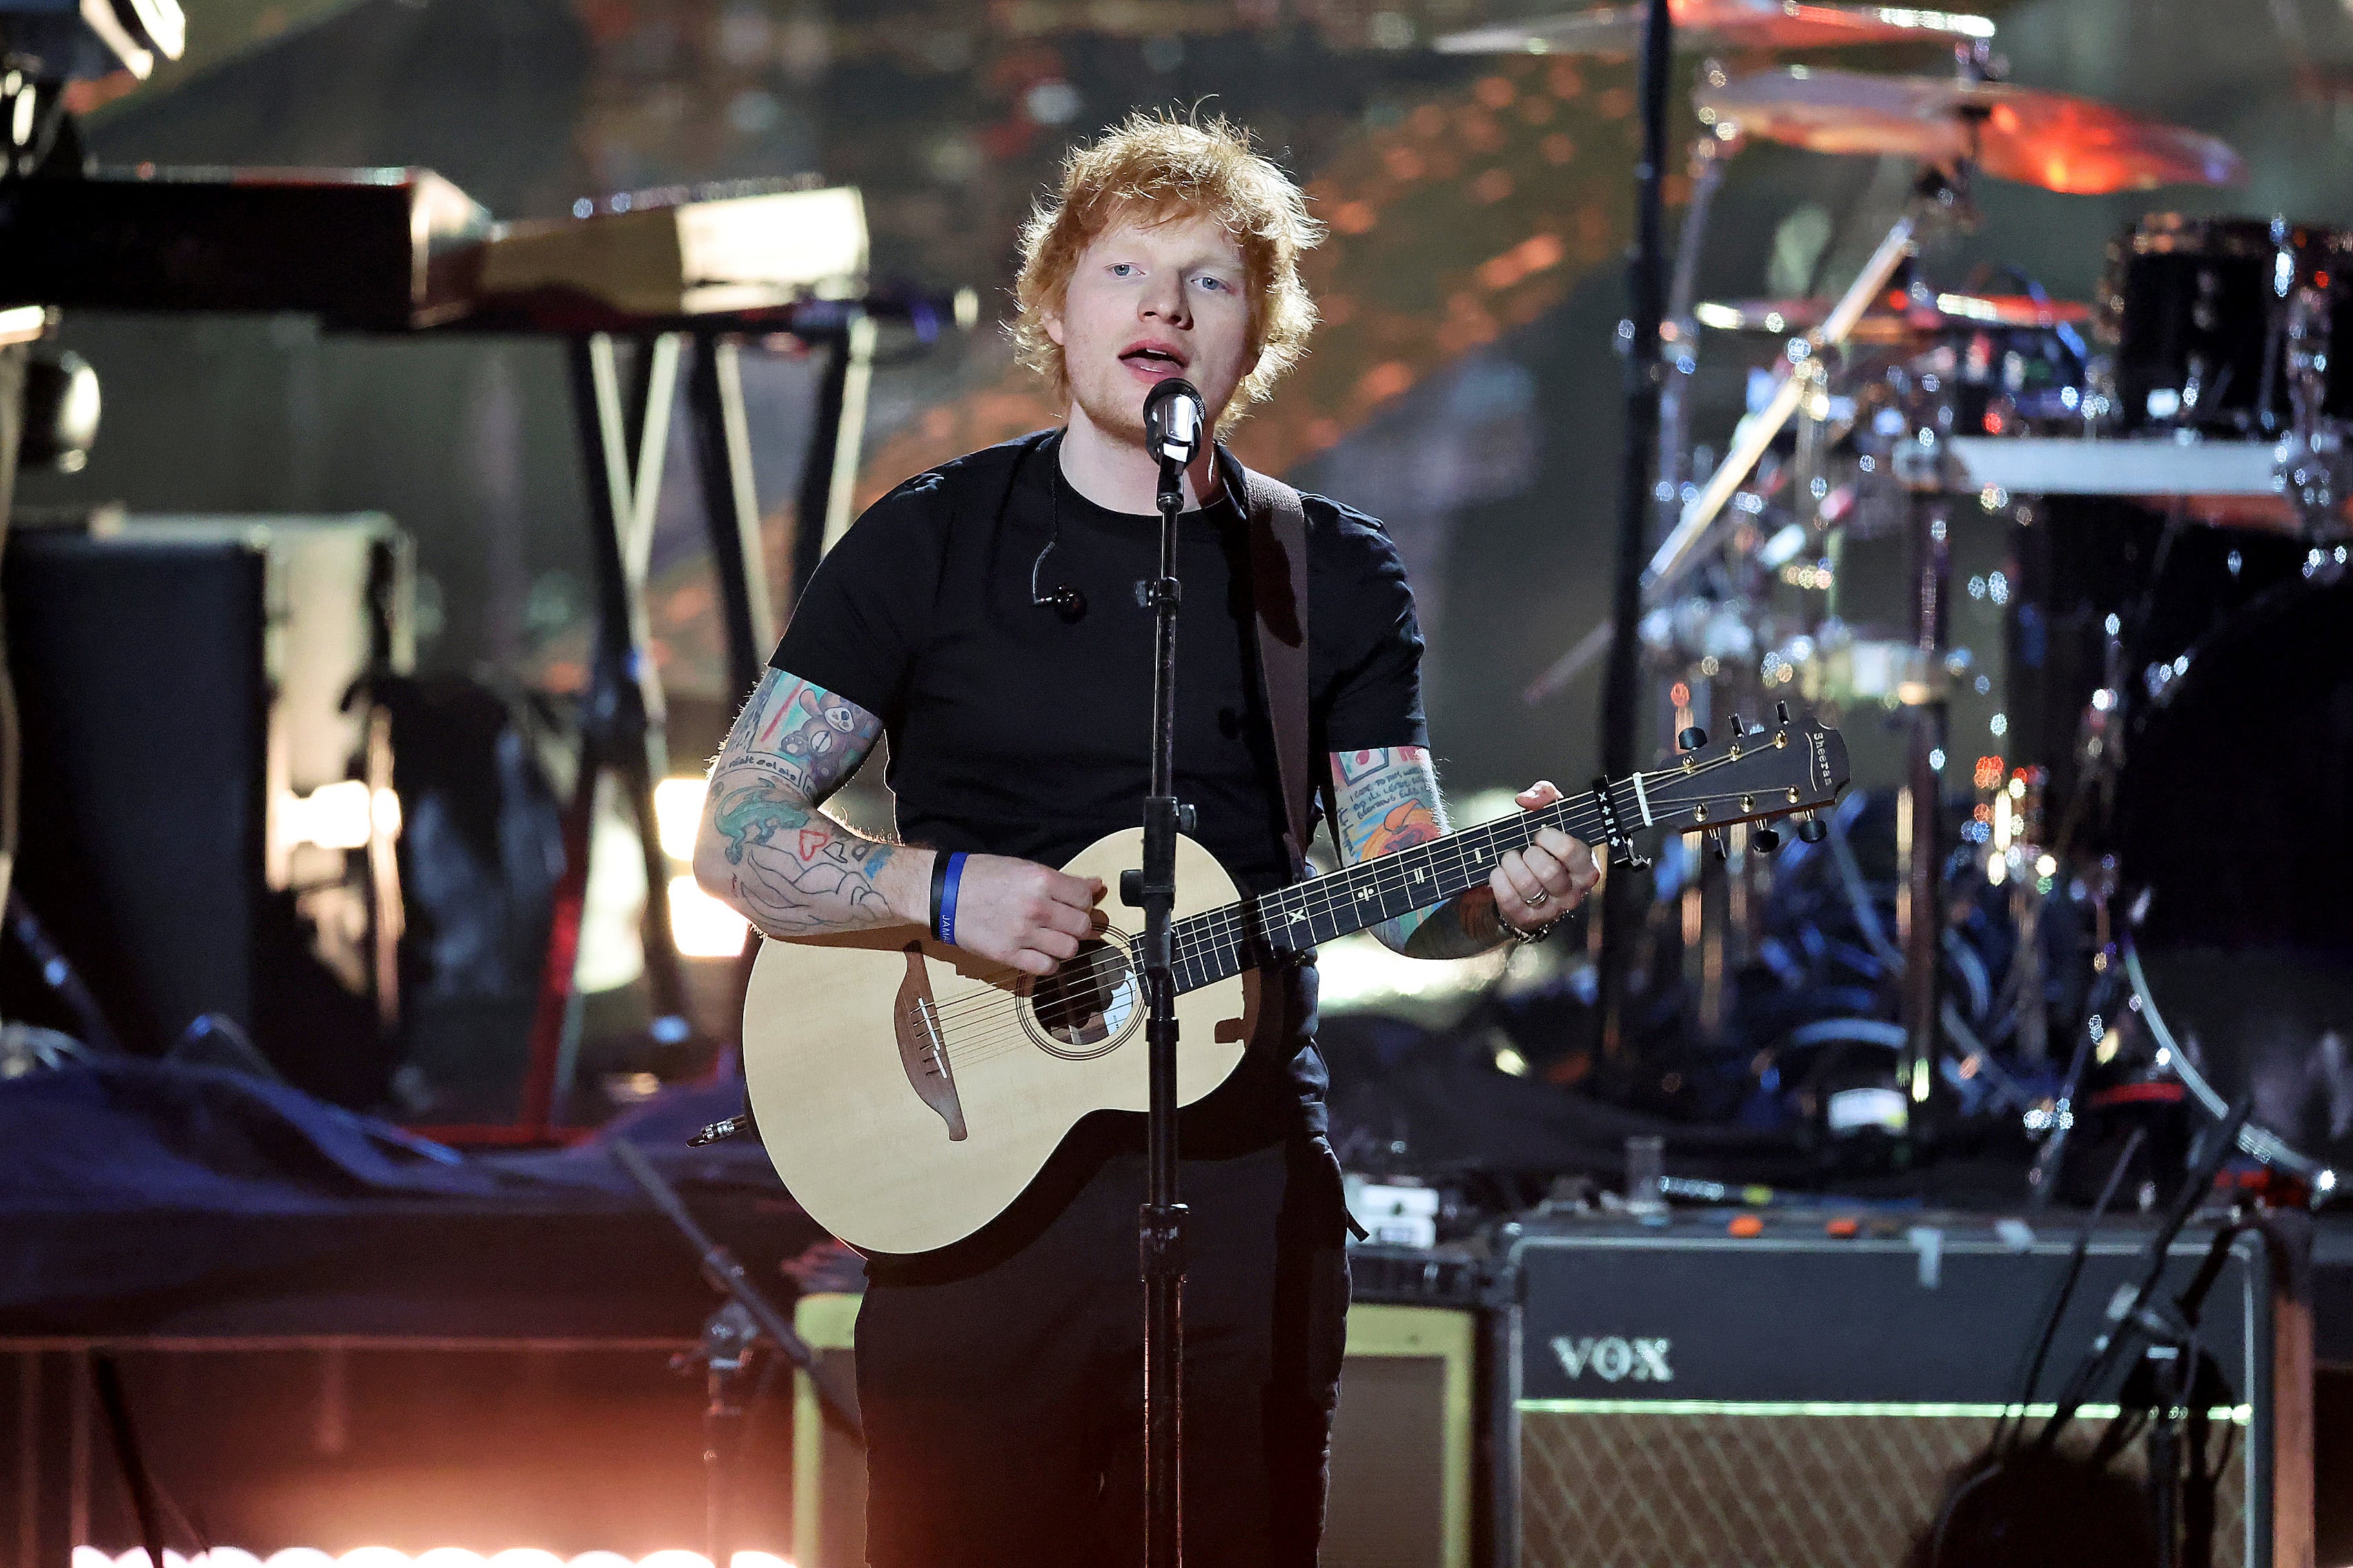 Ed Sheeran opens up about body image, eating struggles - Los Angeles Times